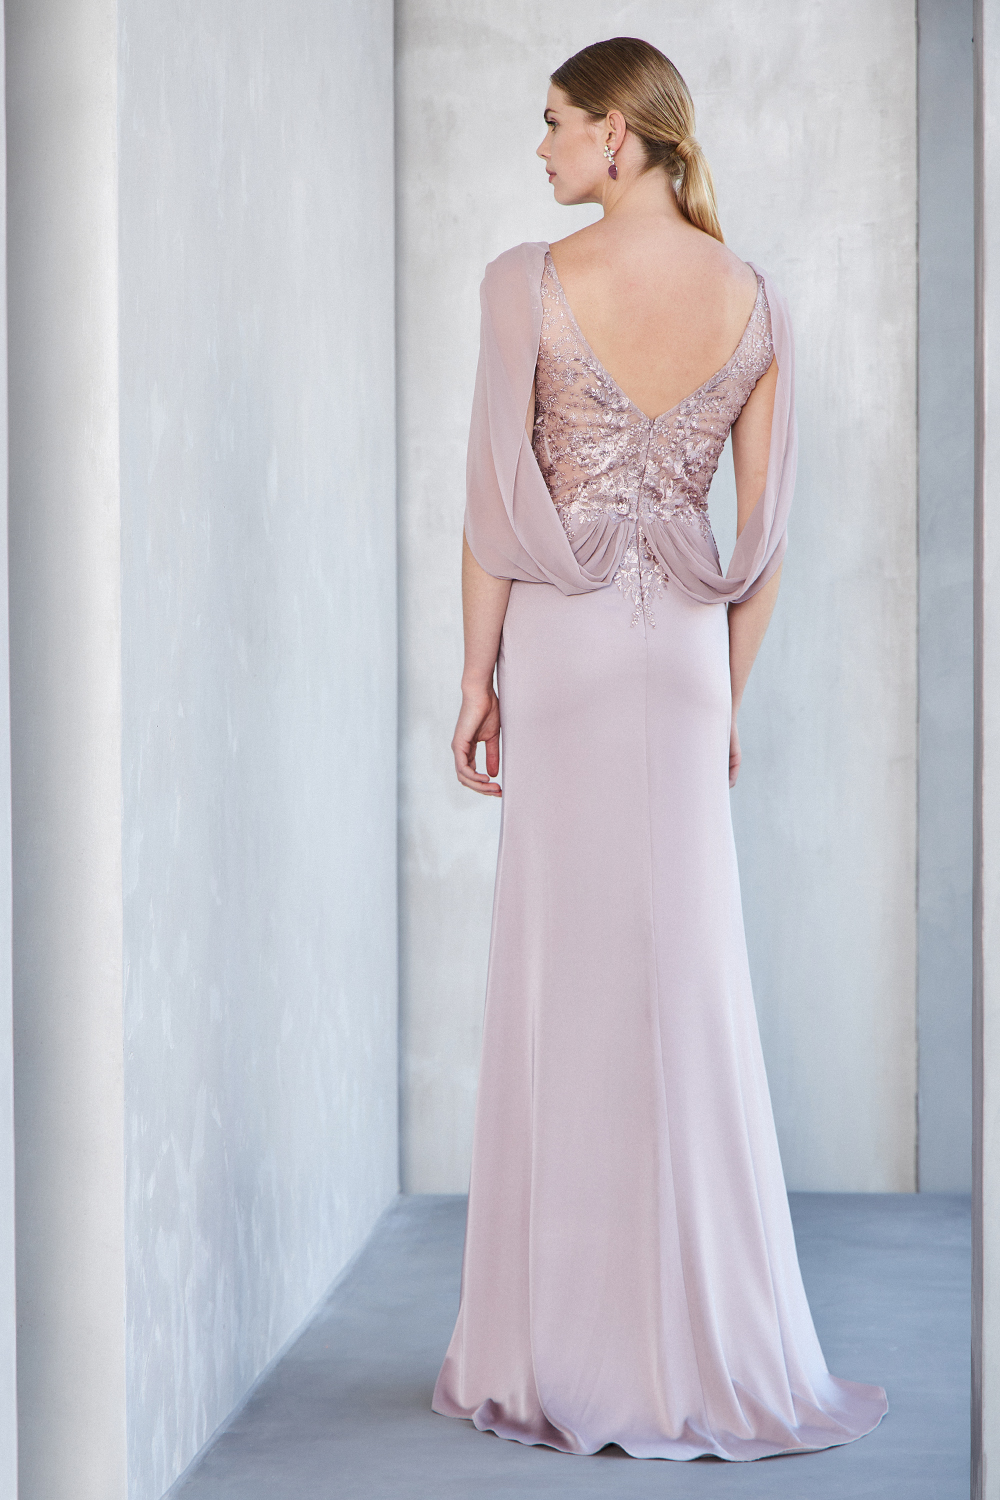 Classic Dresses / Long evening satin beaded dress with lace top and long sleeves with chiffon